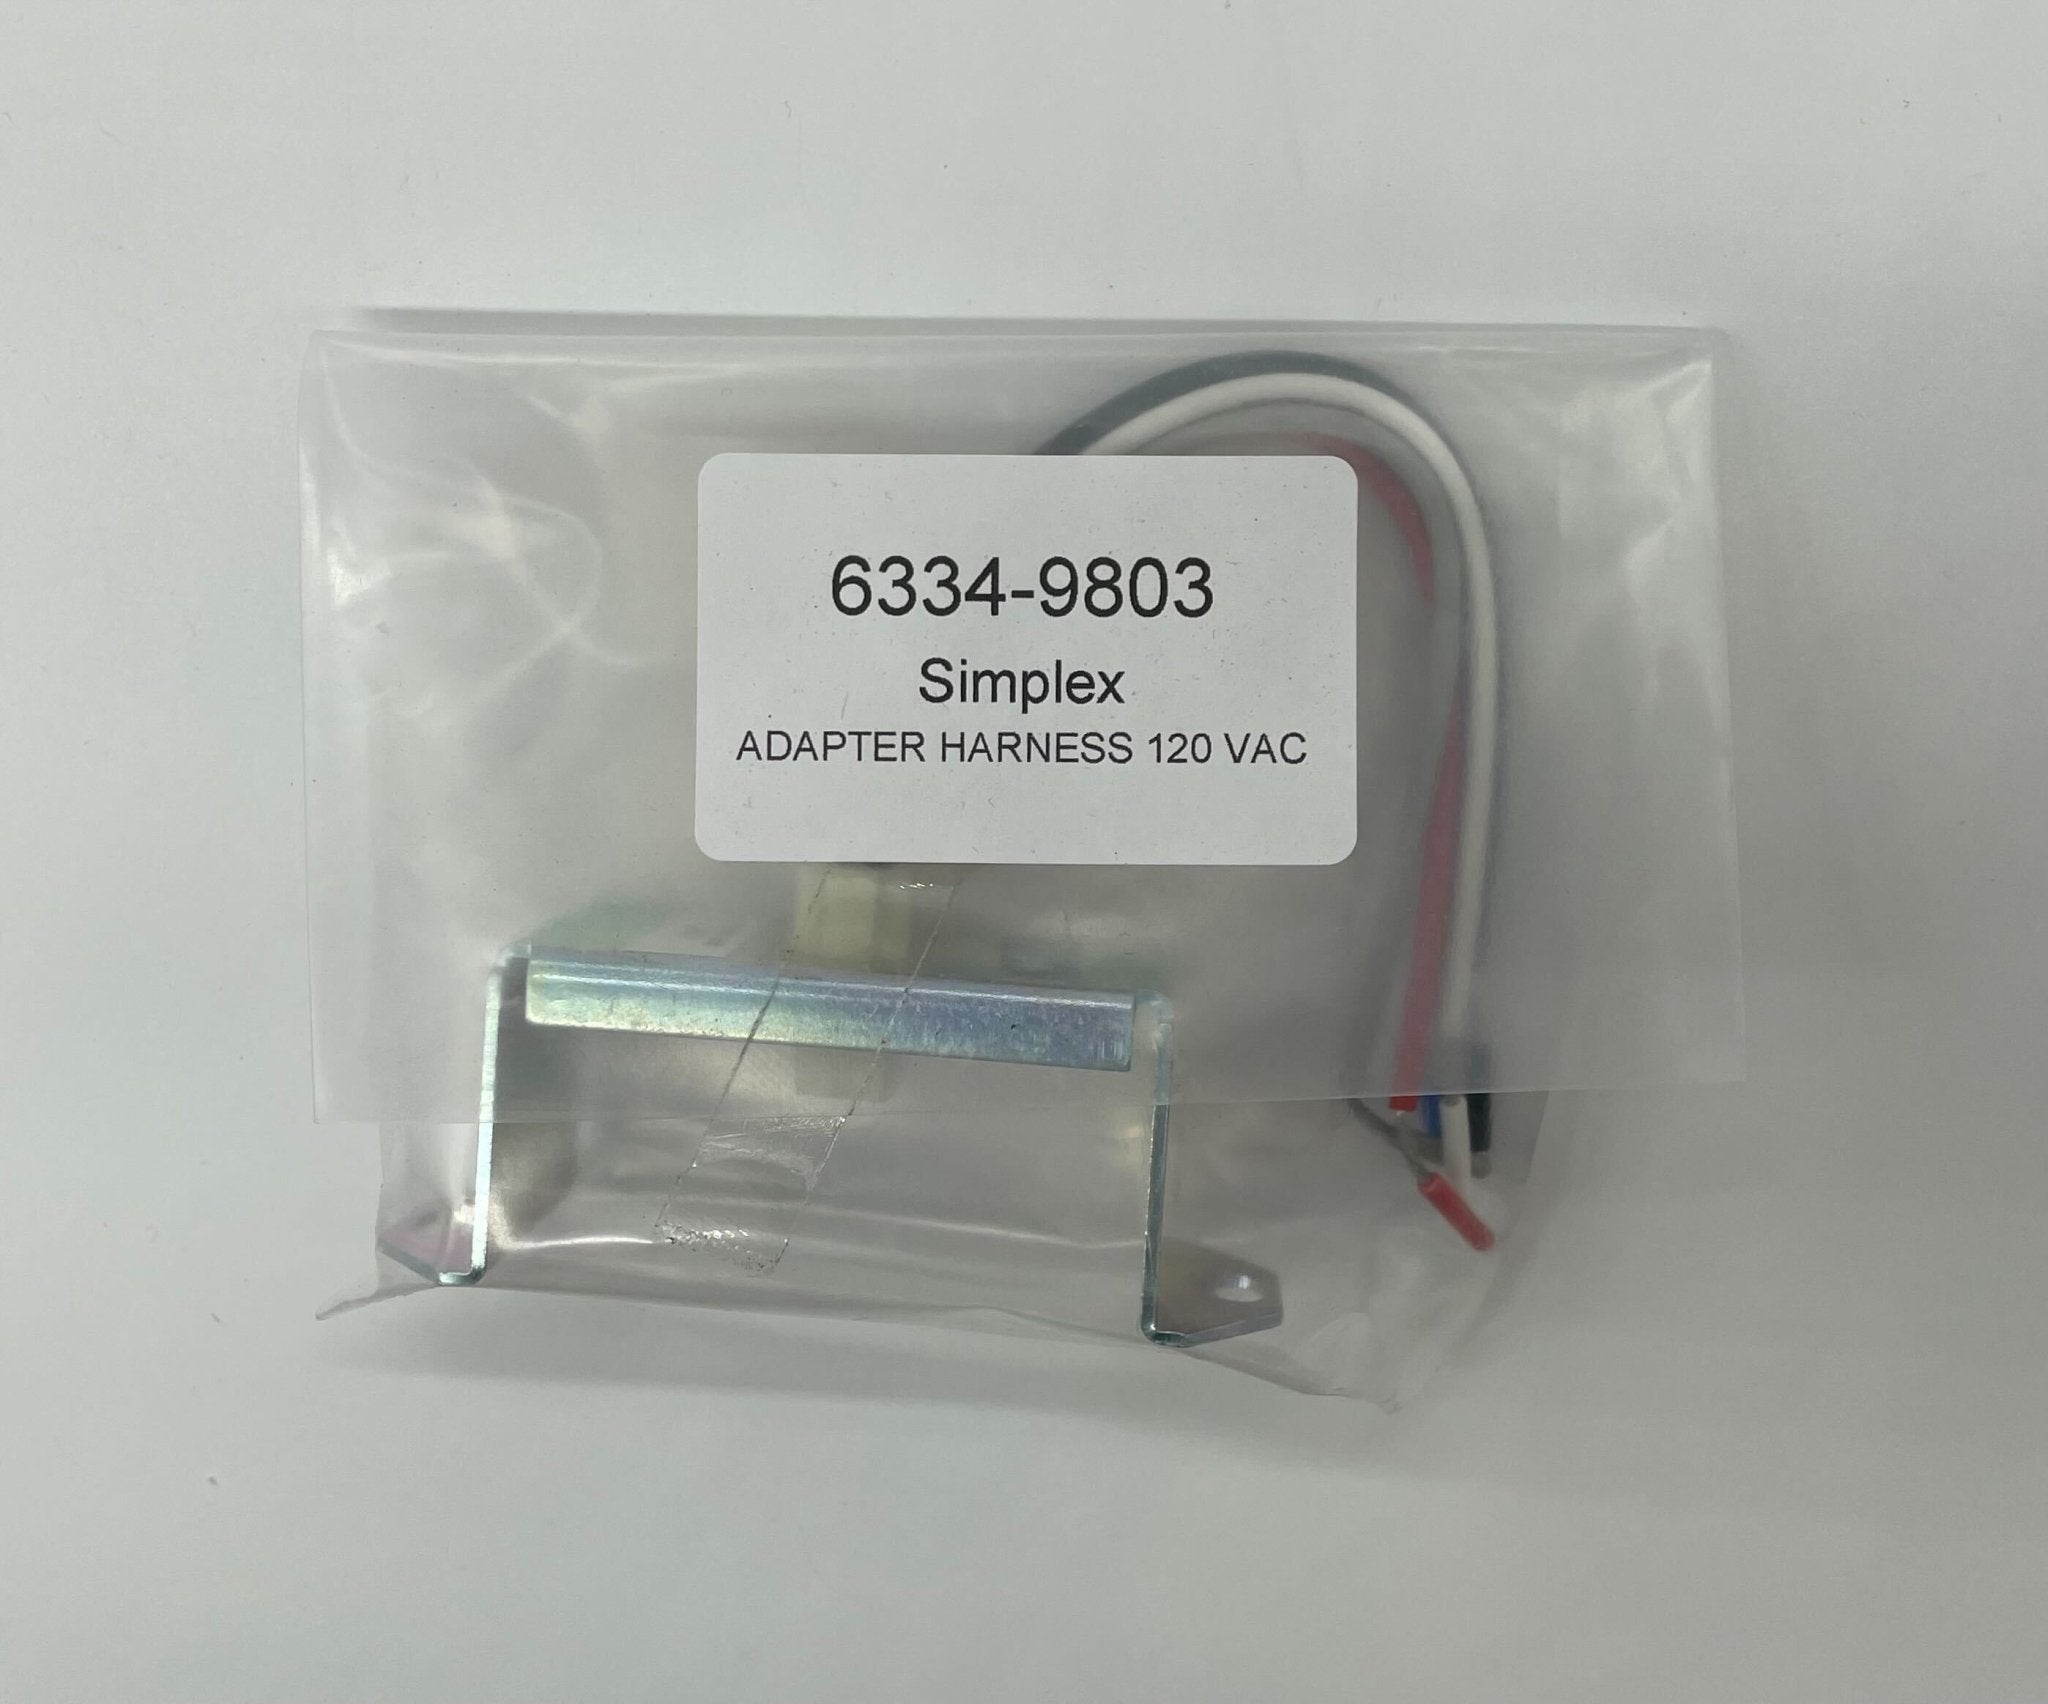 Simplex 6334-9803 Adapter Harness - The Fire Alarm Supplier